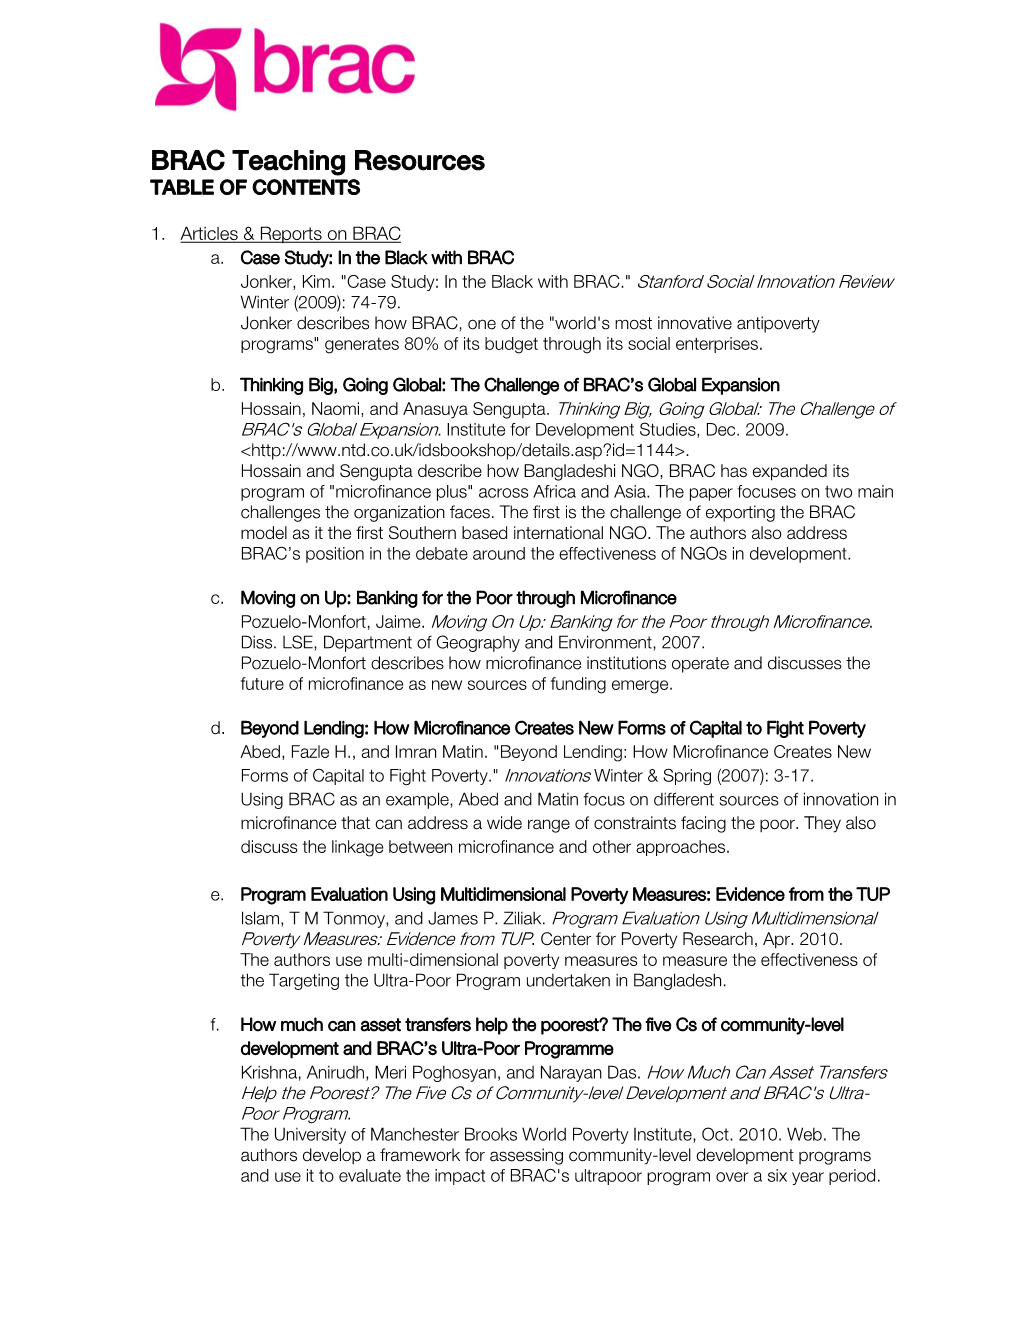 BRAC Teaching Resources TABLE of CONTENTS